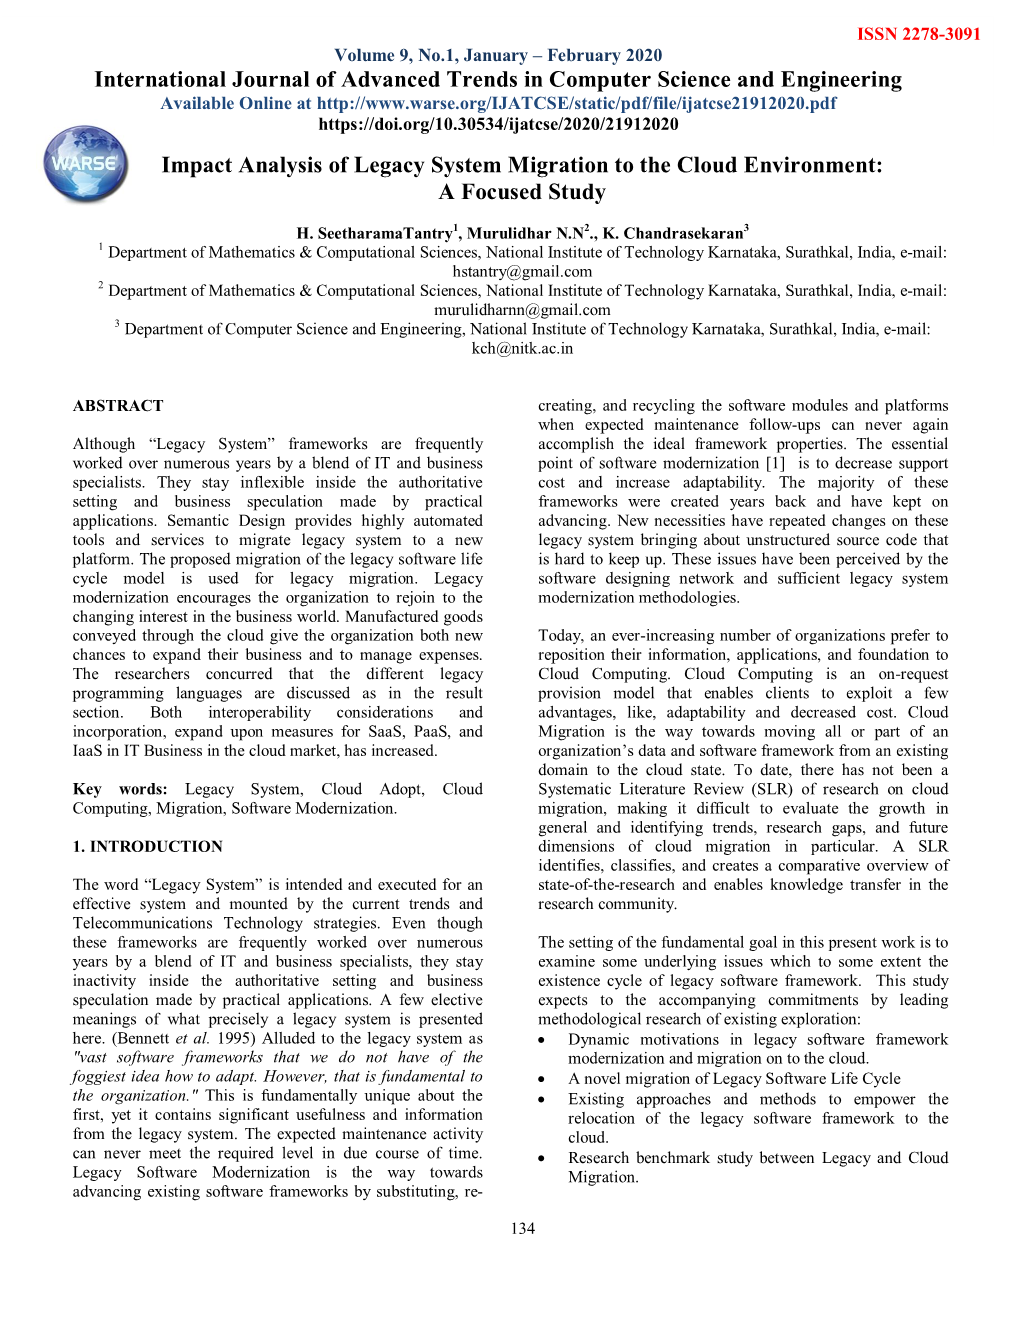 Impact Analysis of Legacy System Migration to the Cloud Environment: a Focused Study